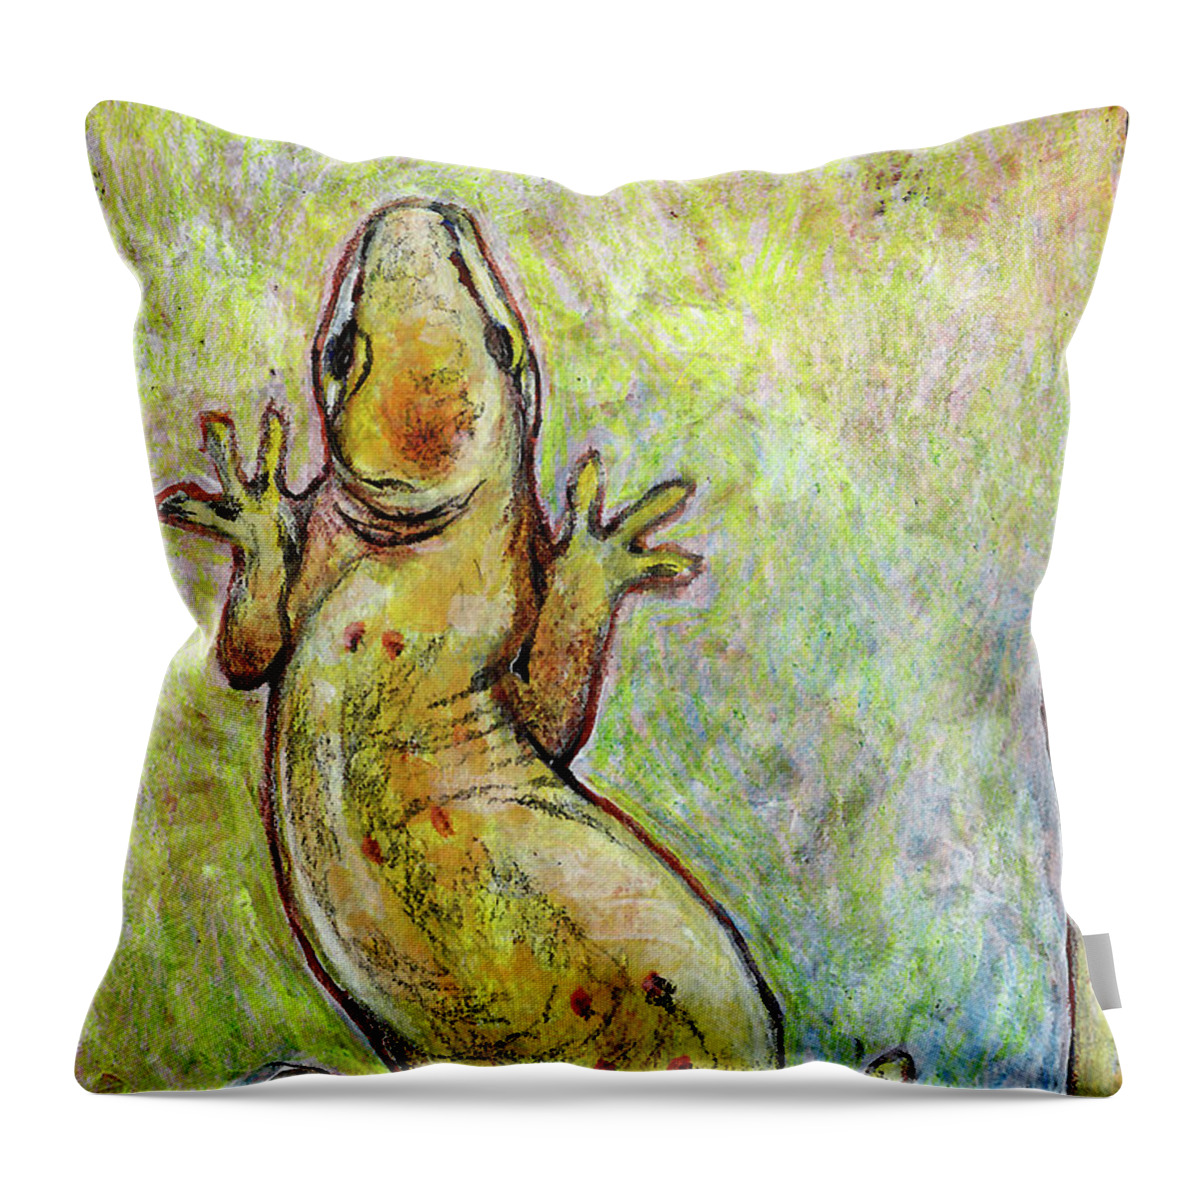 Gecko Throw Pillow featuring the mixed media It's a Gecko by AnneMarie Welsh